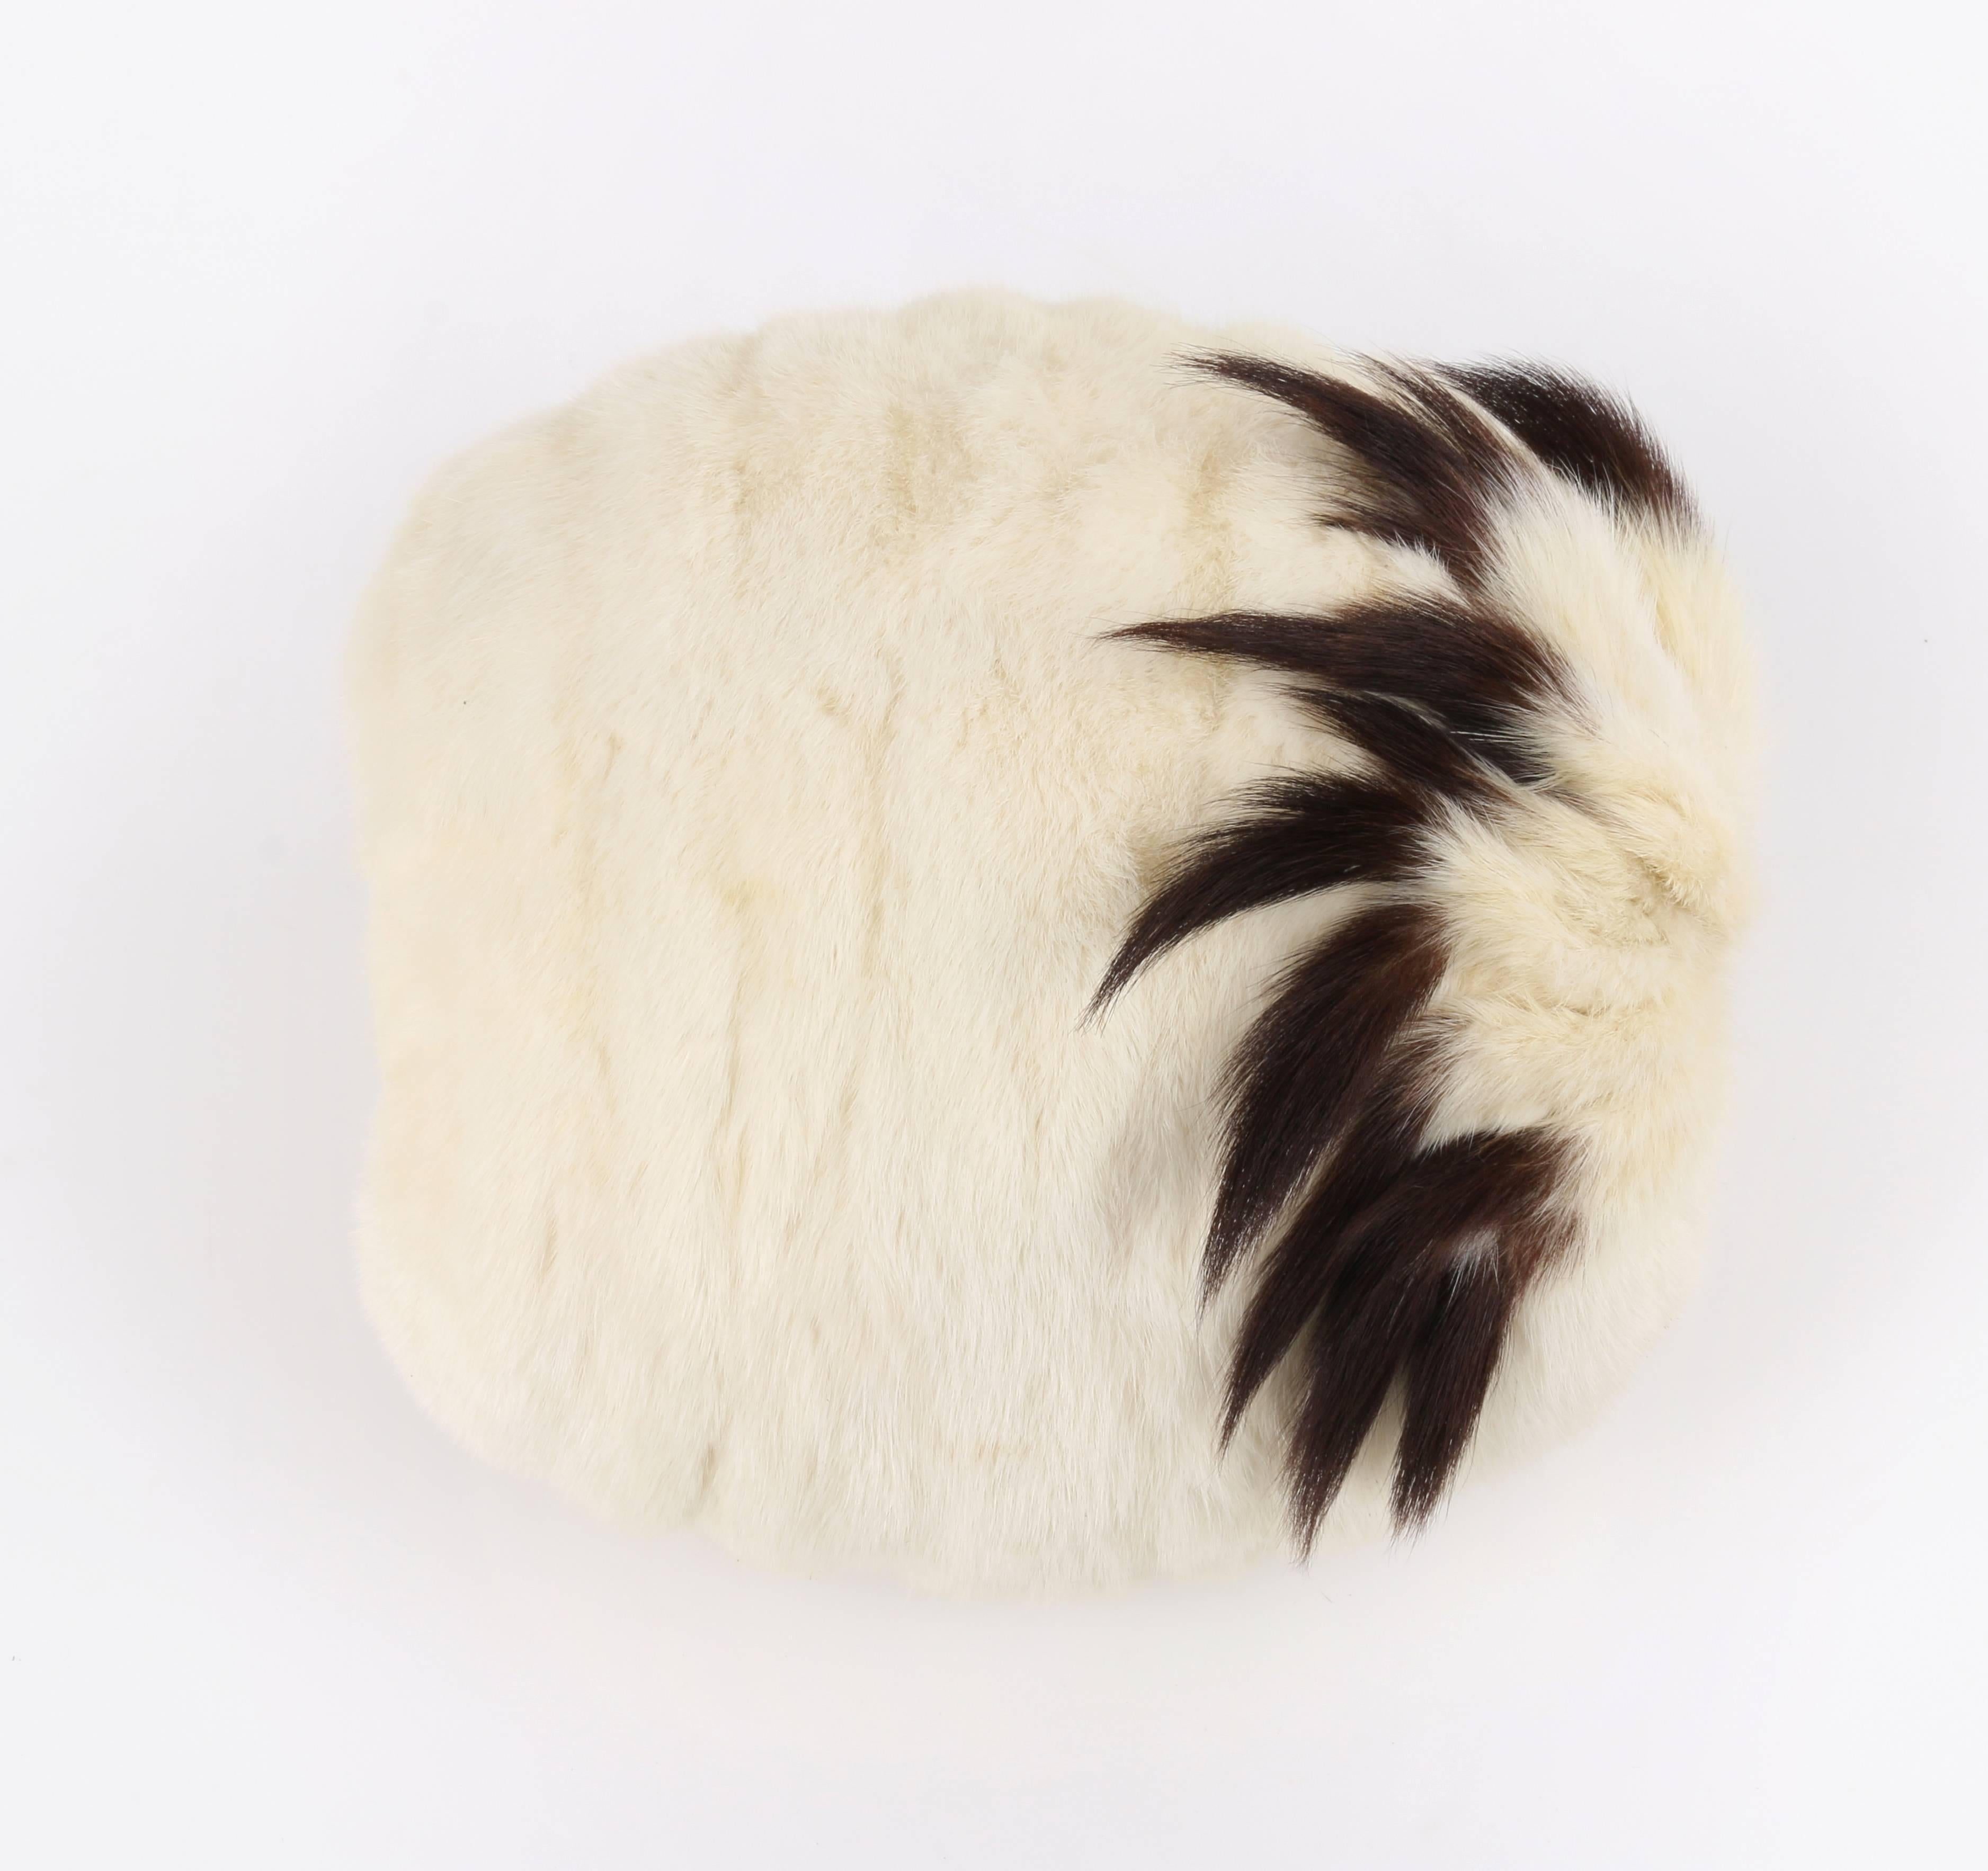 Vintage Edwardian early 1900's winter white genuine fur and tail hand warmer / muff. Winter white fur exterior with brown tipped tail detail around opening. Fully lined in beige silk satin. Singe interior fabric wrist strap. Unmarked Fabric Content: